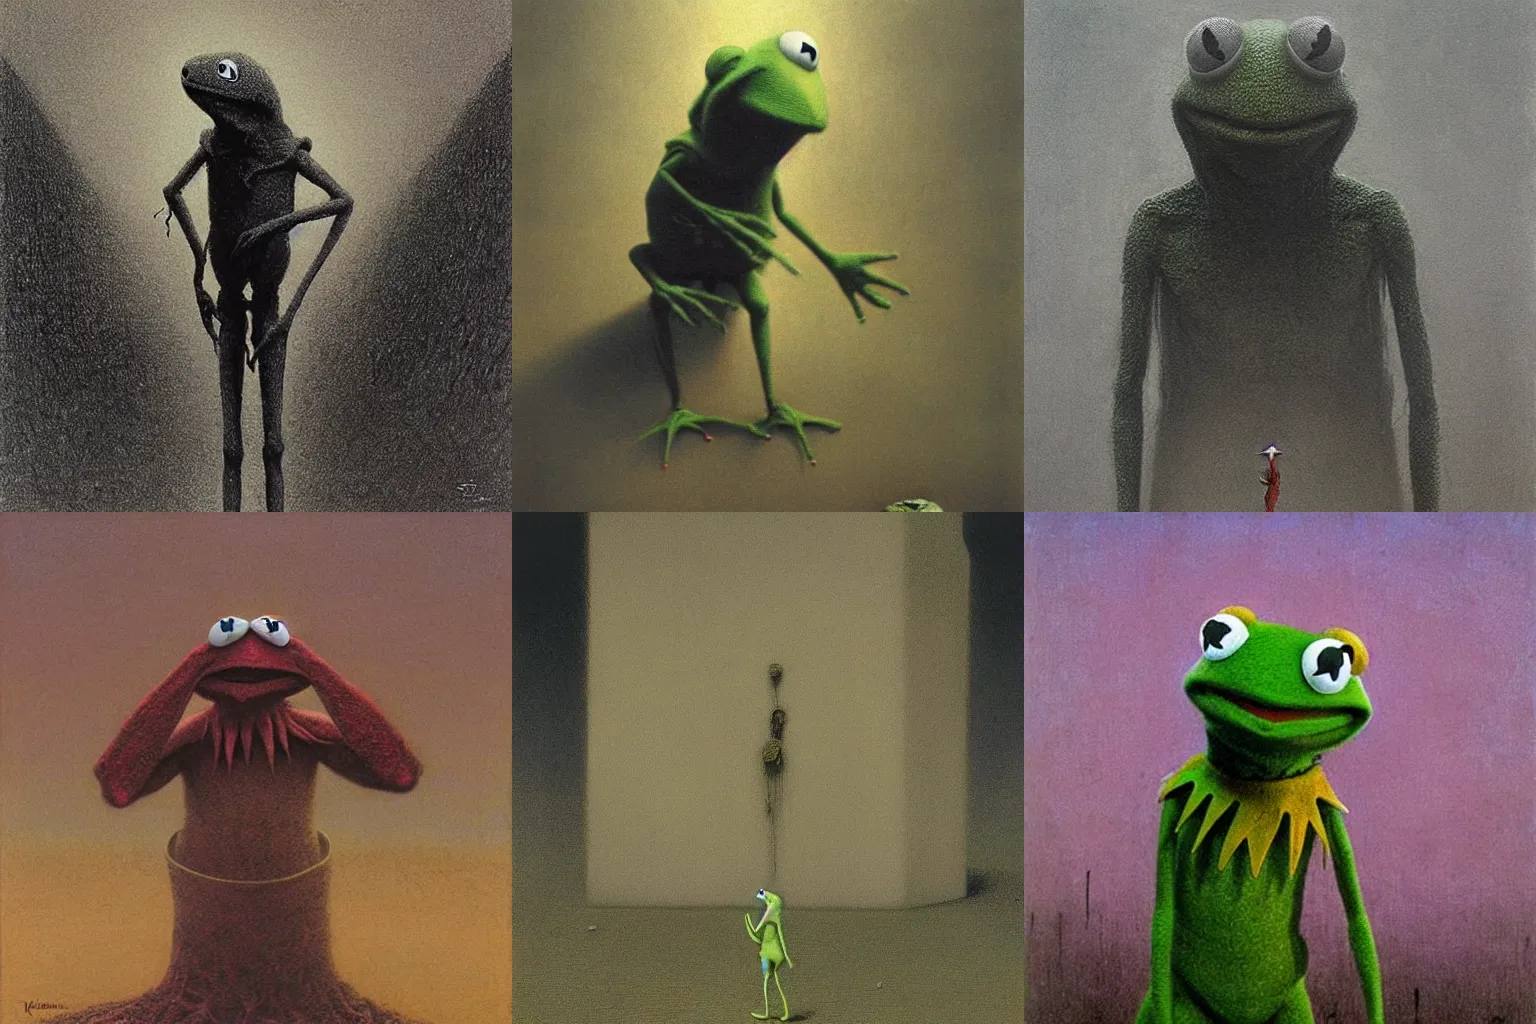 Prompt: Kermit the frog standing there menacingly by beksinski